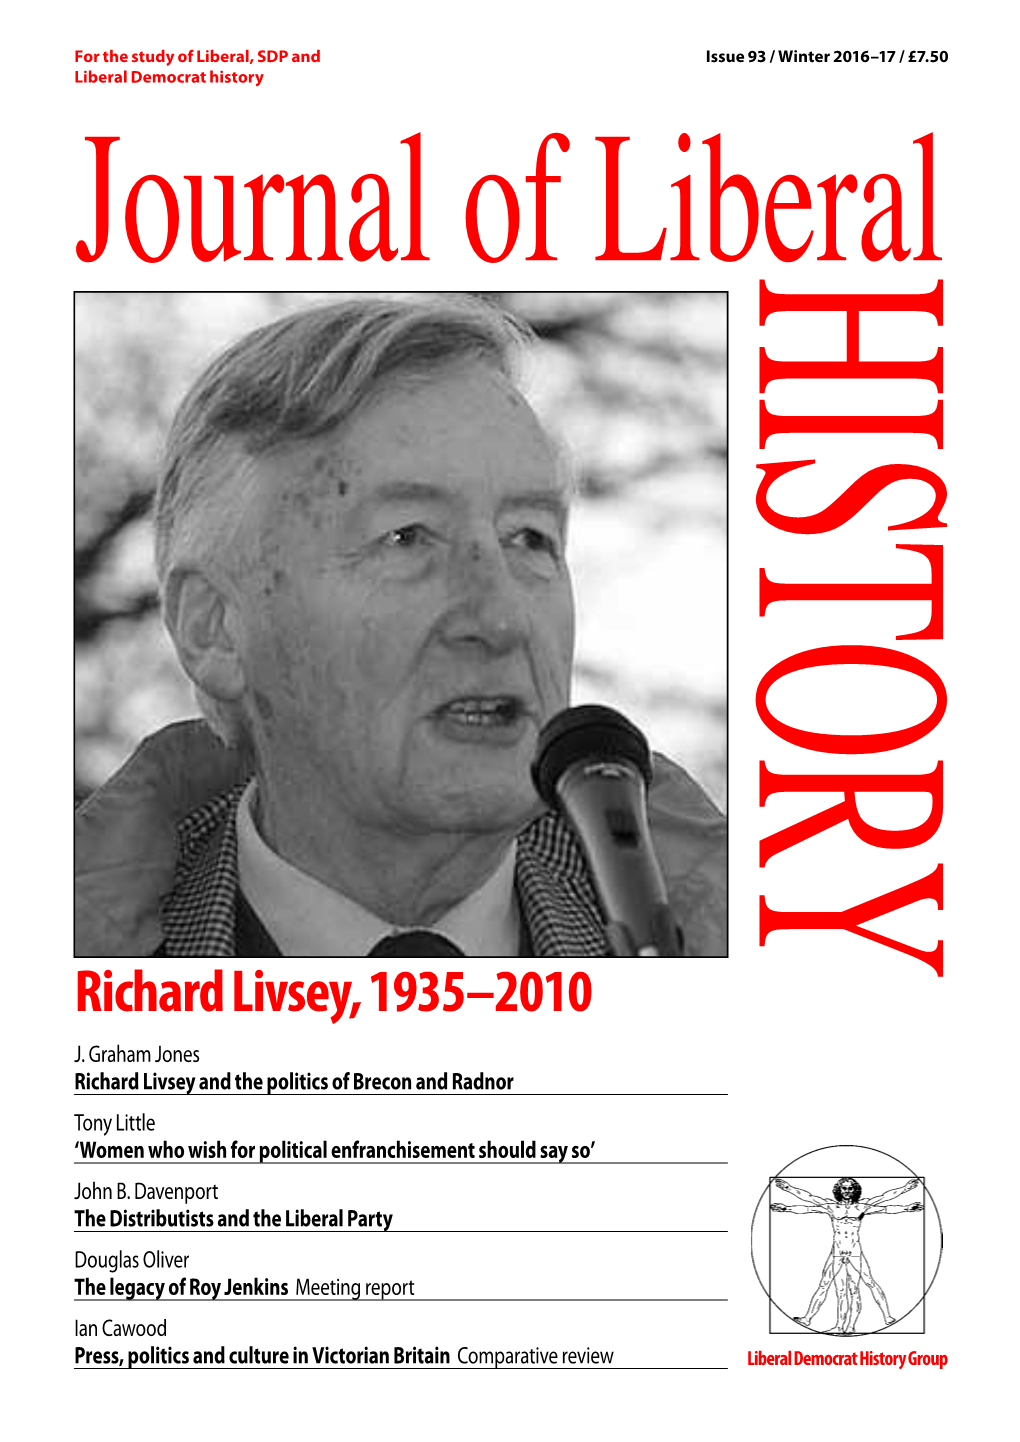 93 Winter 2016–17 Journal of Liberal History Issue 93: Winter 2016–17 the Journal of Liberal History Is Published Quarterly by the Liberal Democrat History Group